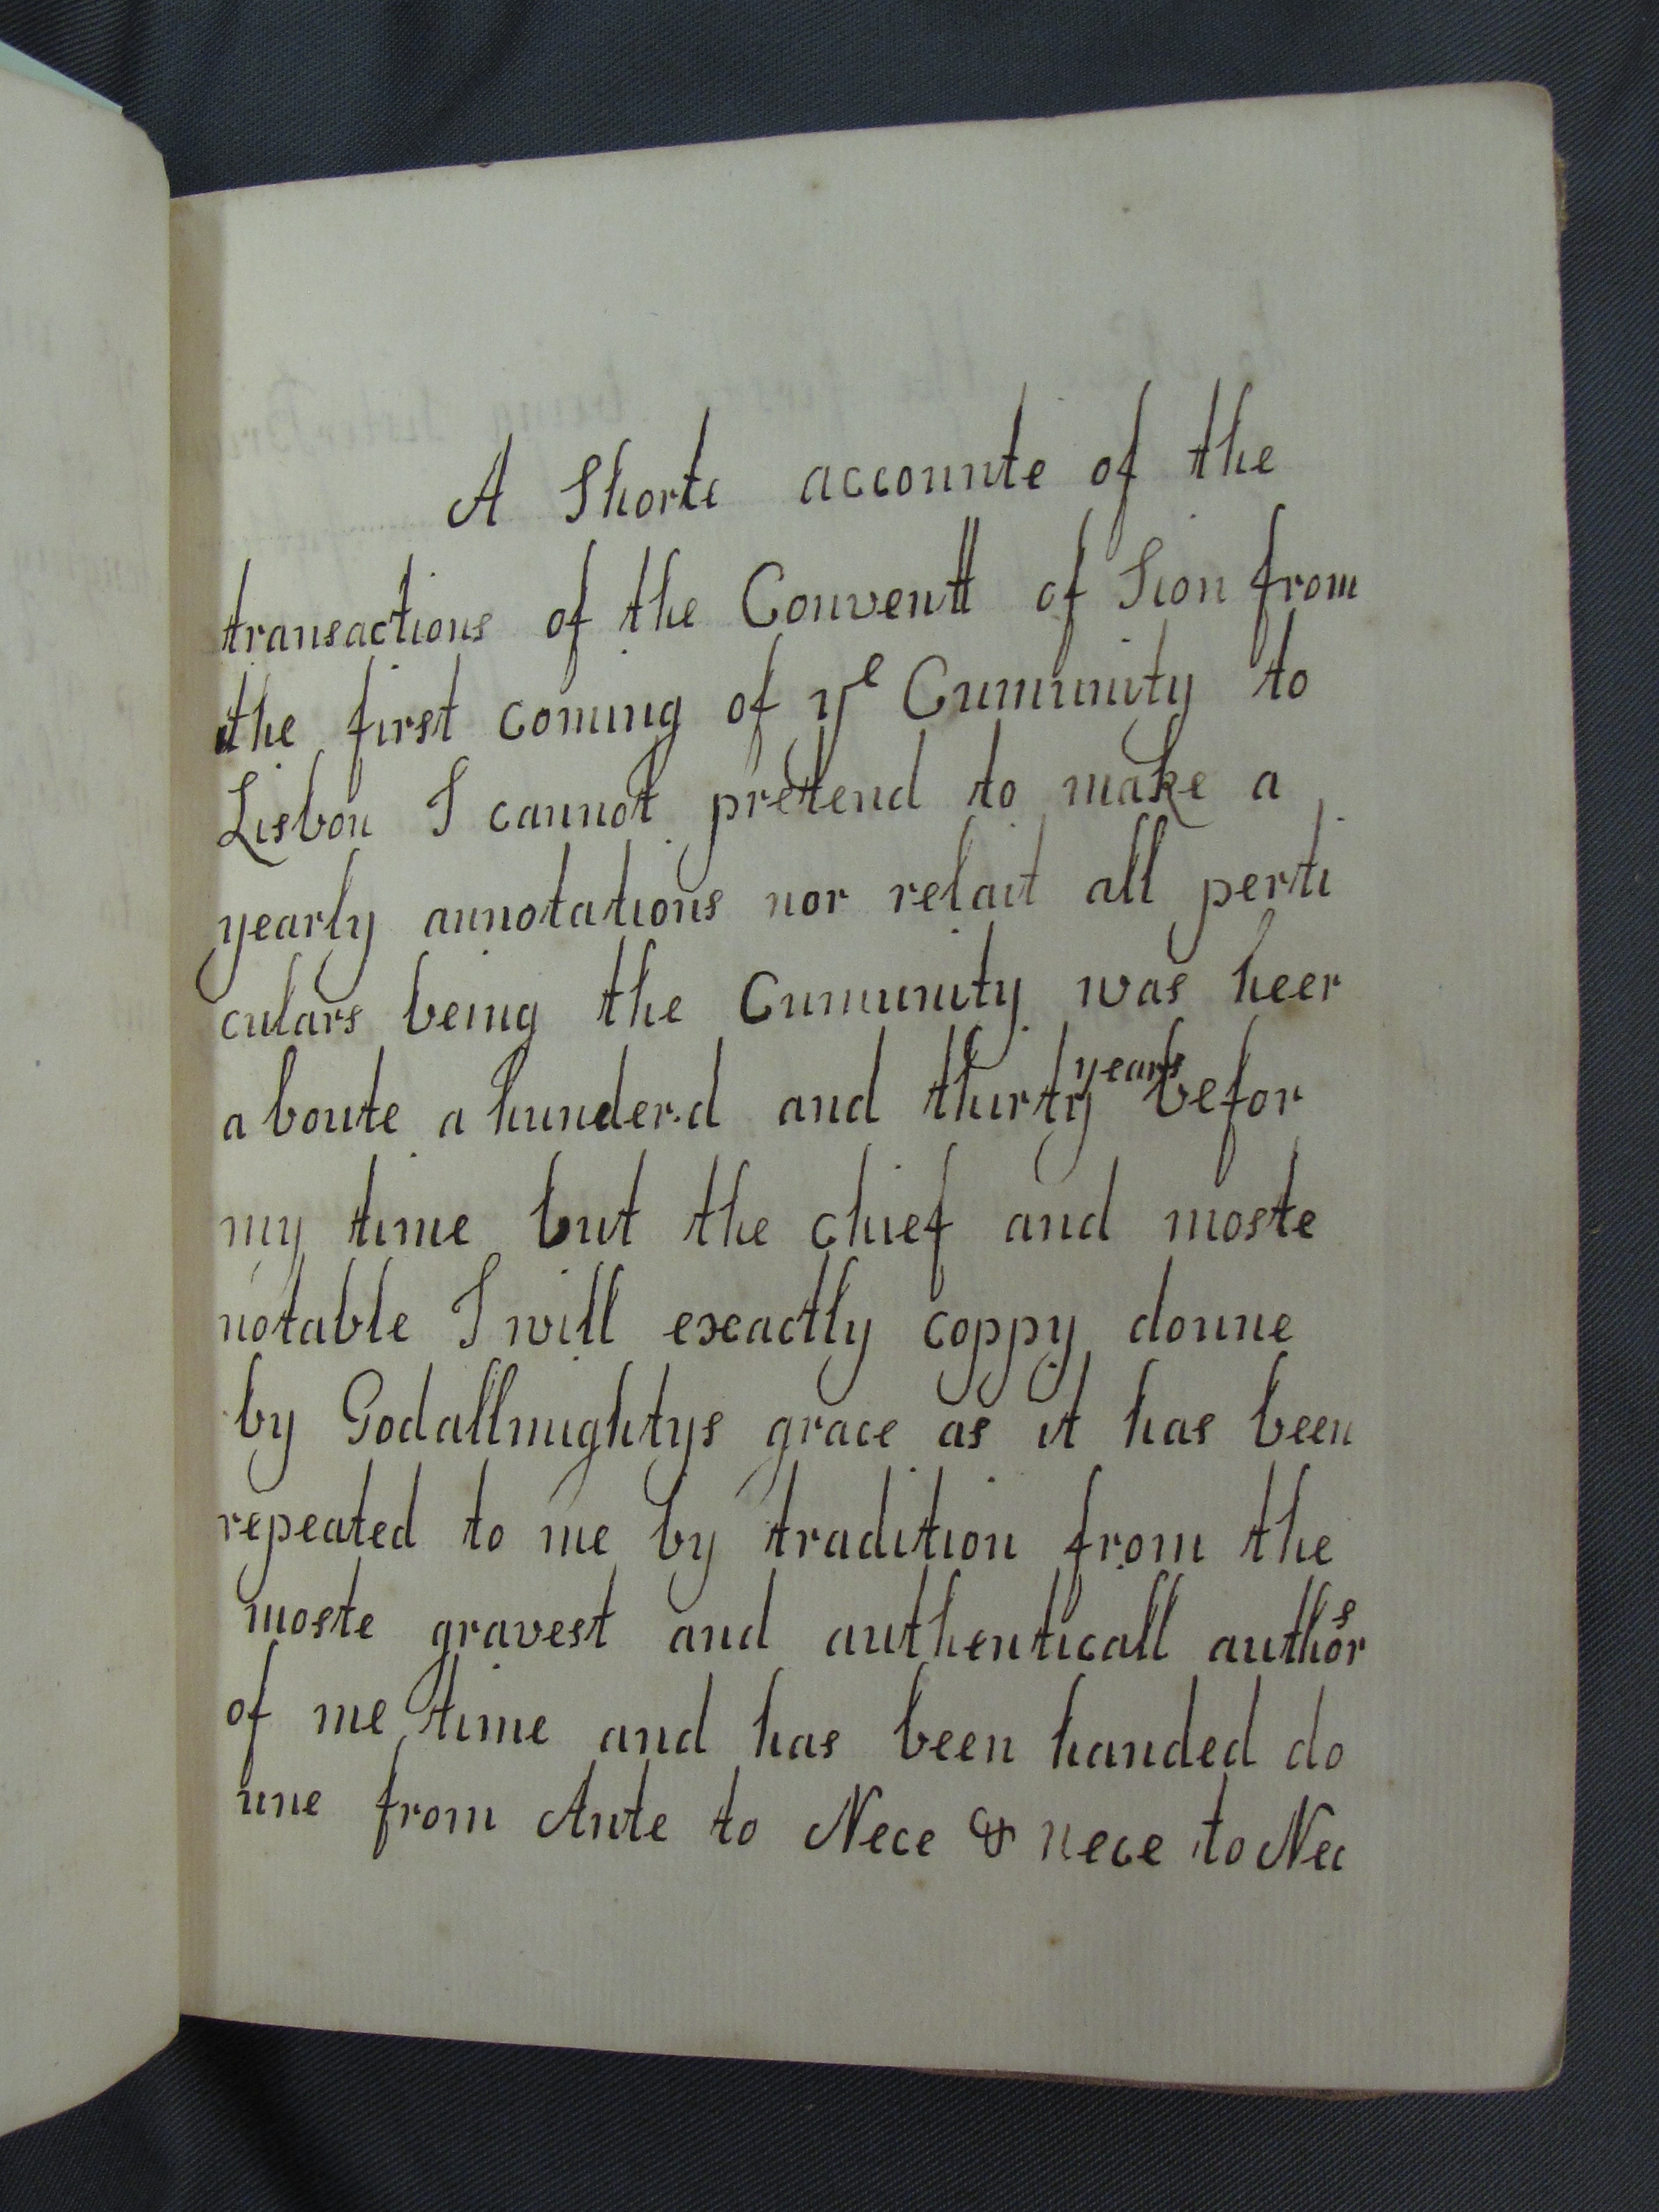 EUL MS 262/add2/27. First page of a manuscript beginning 'A shorte accounte of the transactions of the Conventt of Sion from the first coming of the Cumunity to Lisbon' (c 1724-1738).